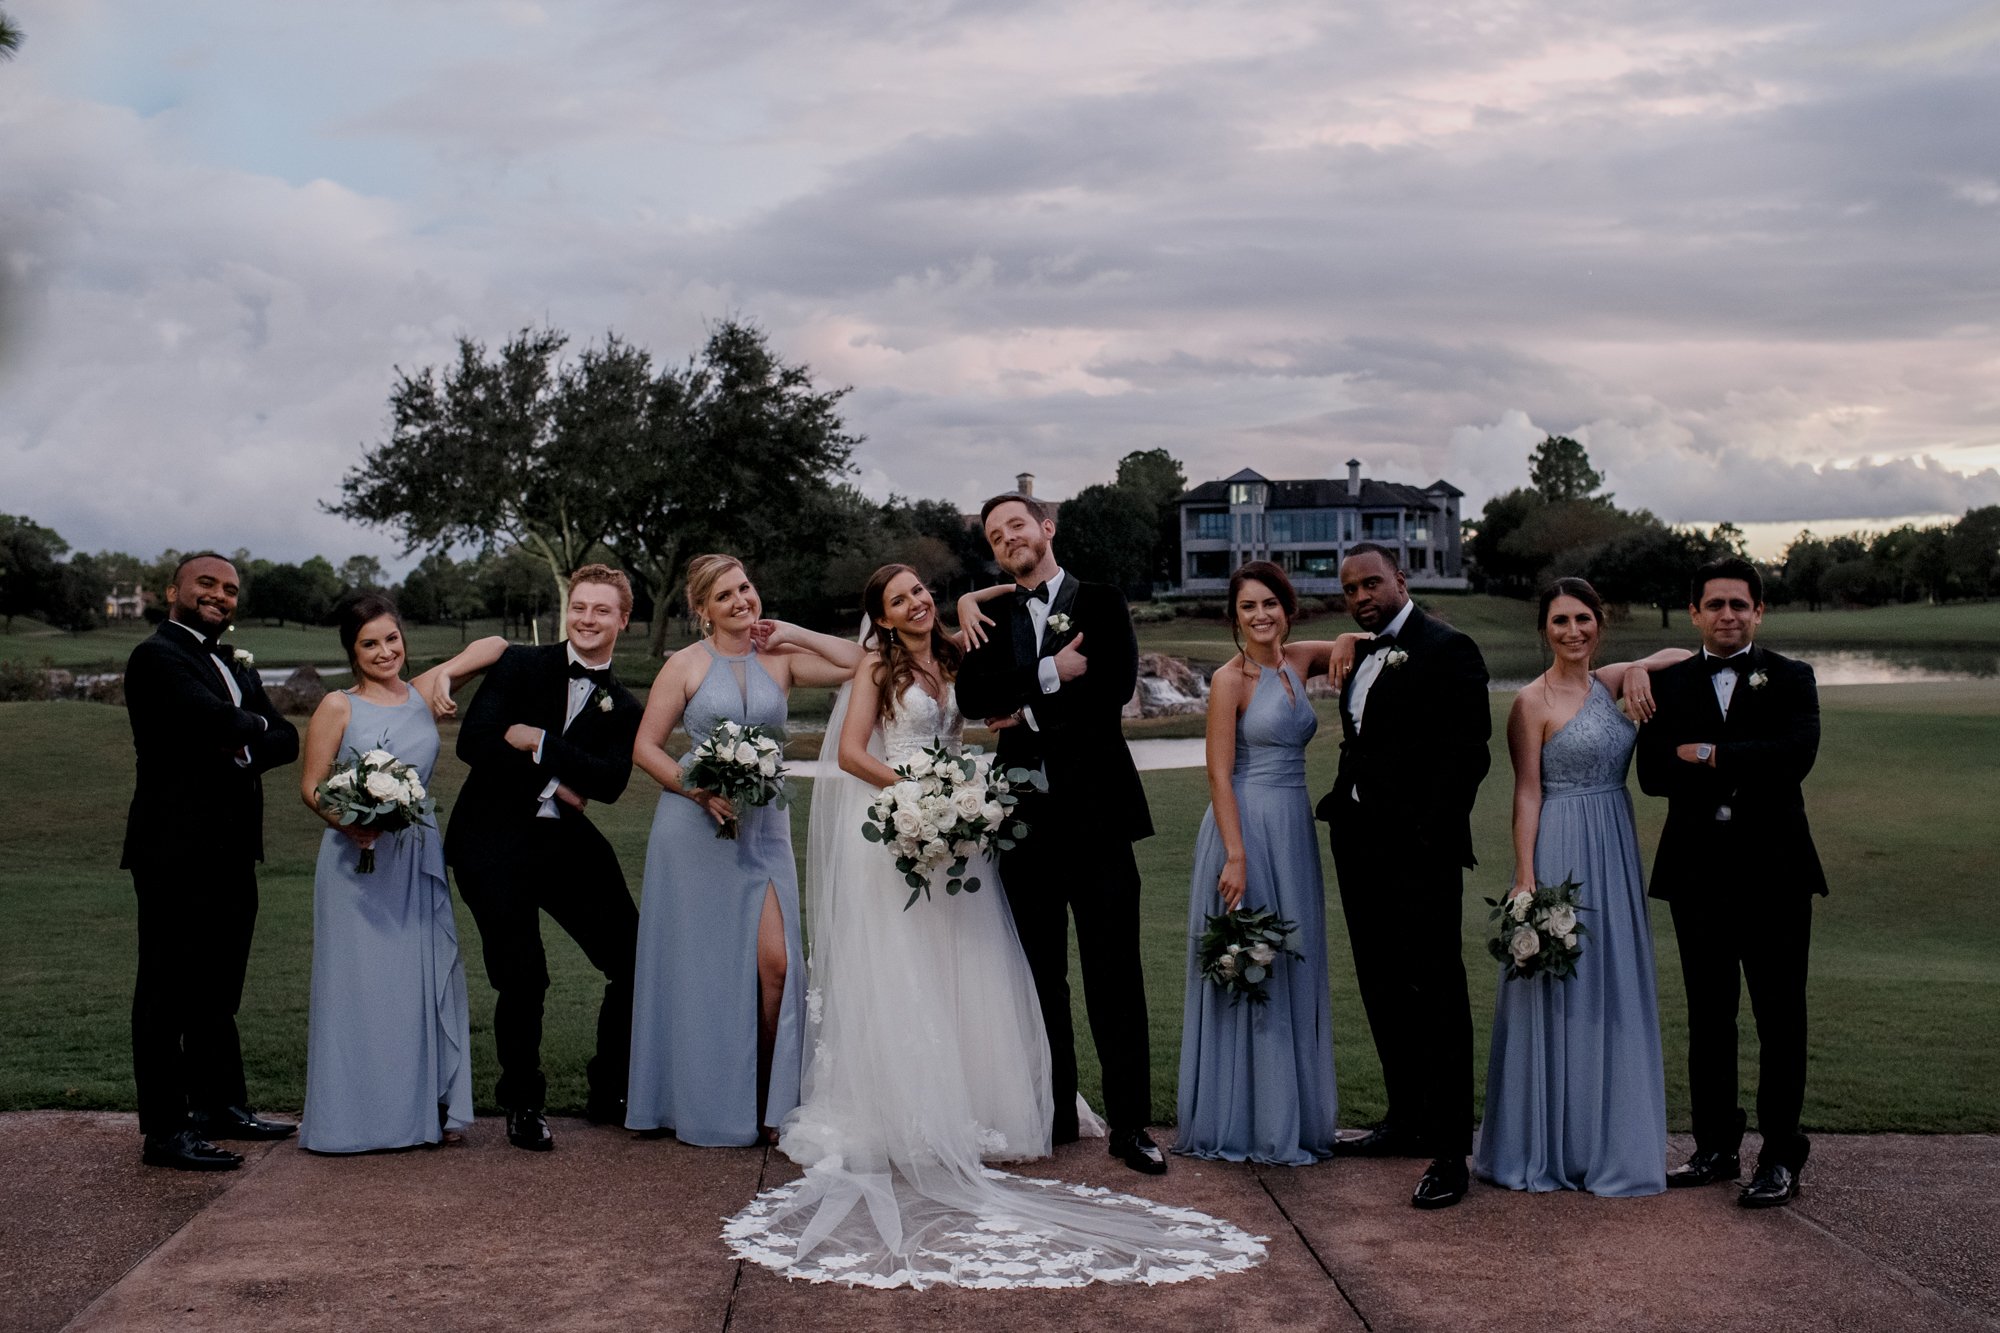 Bride and groom with bridal party sassy poses. Wedding at Royal Oaks Country Club